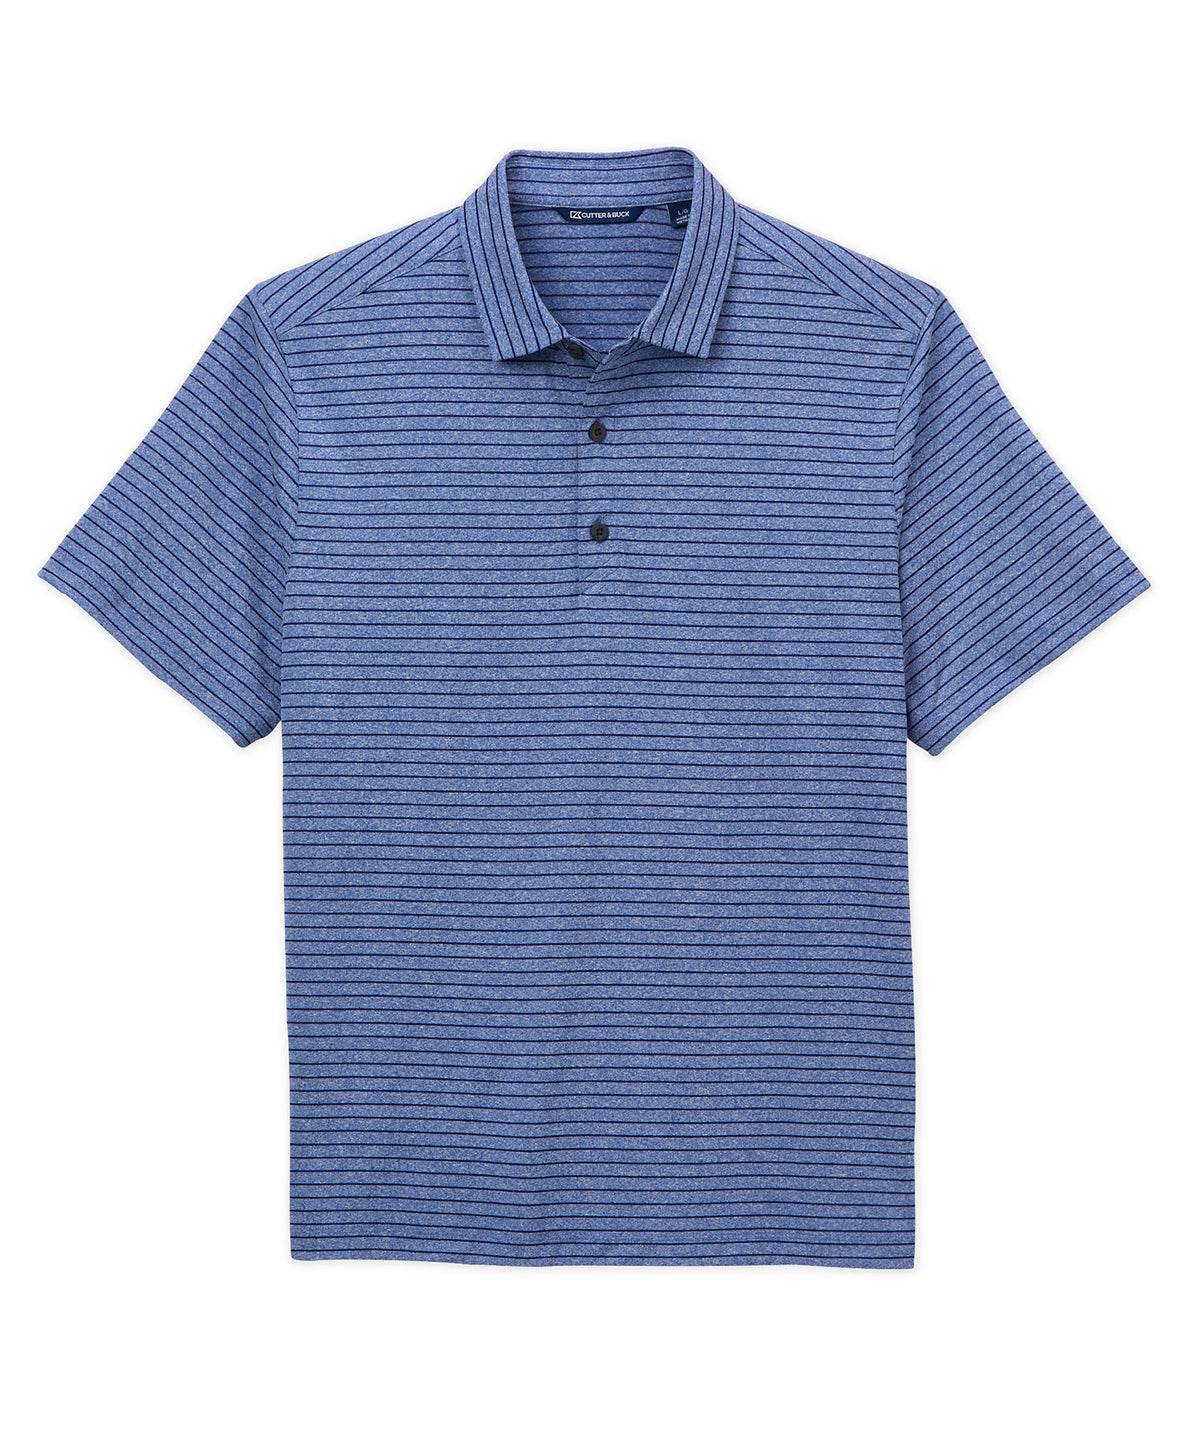 Cutter & Buck Forge Eco Heather Stripe Pattern Stretch Recycled Polo, Men's Big & Tall